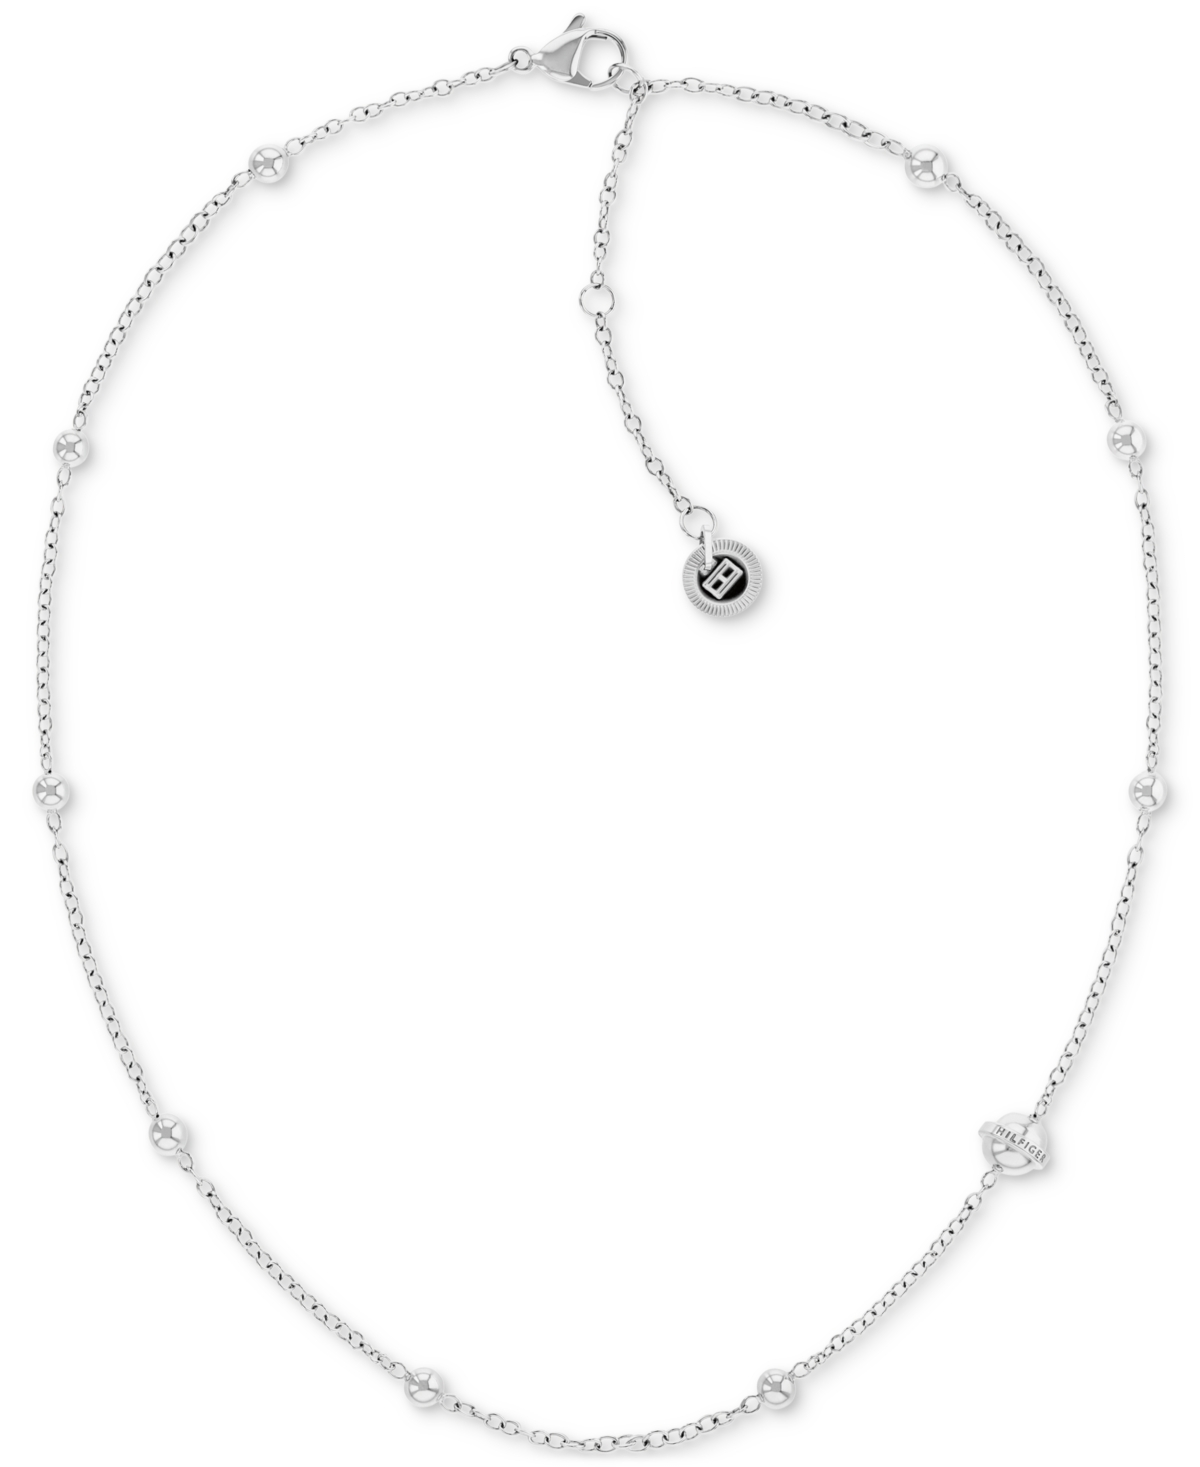 Stainless Steel Metallic Orb Station Necklace, 16" + 2" extender - Silver